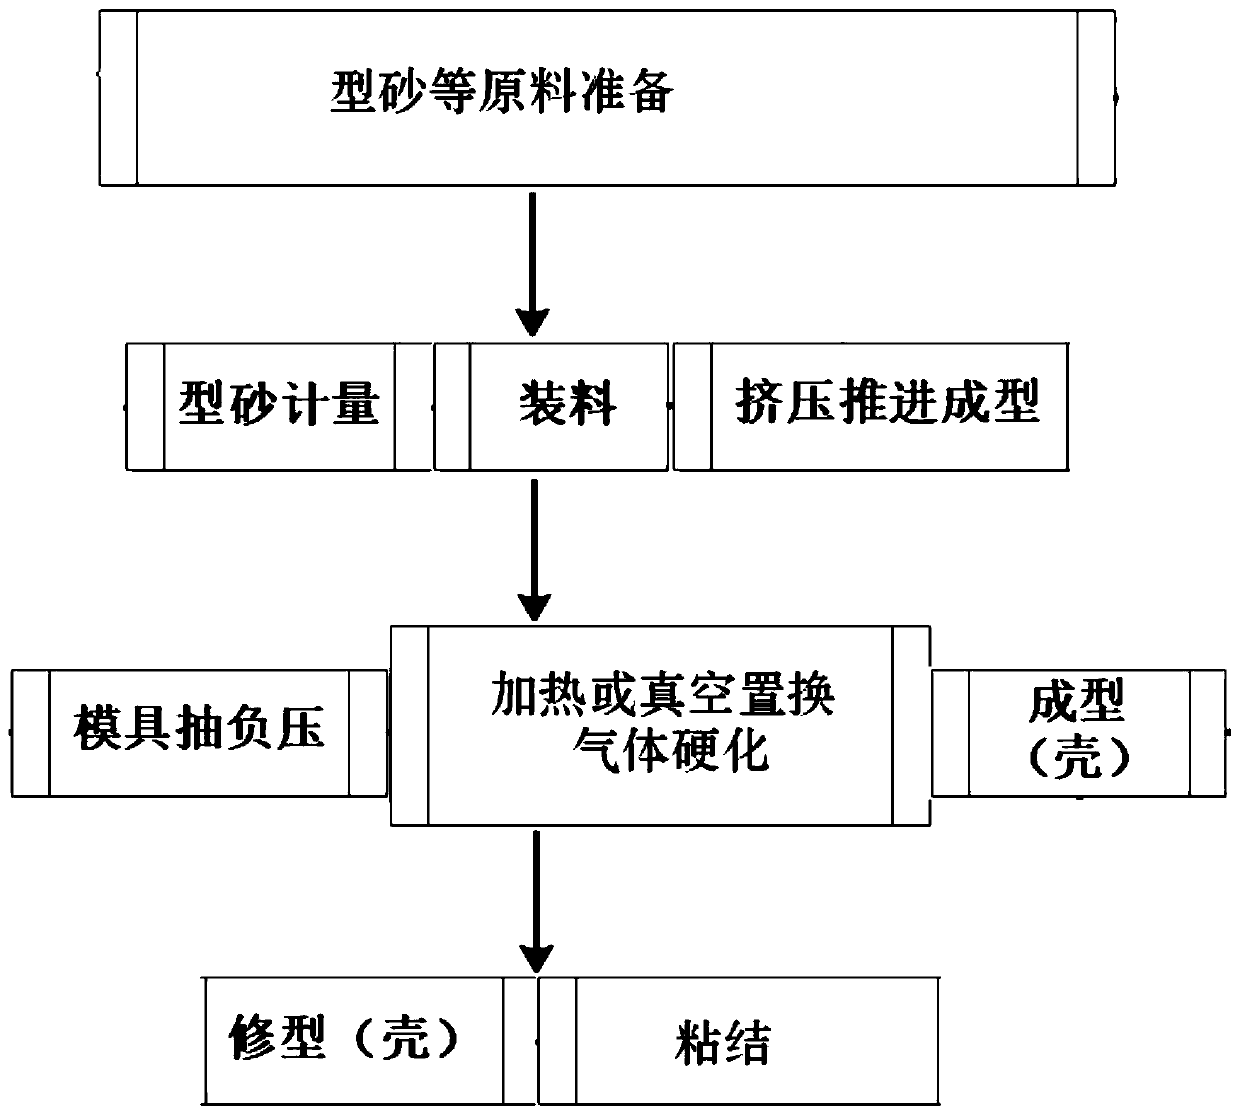 Extrusion molding process method for sand mold or shell for casting